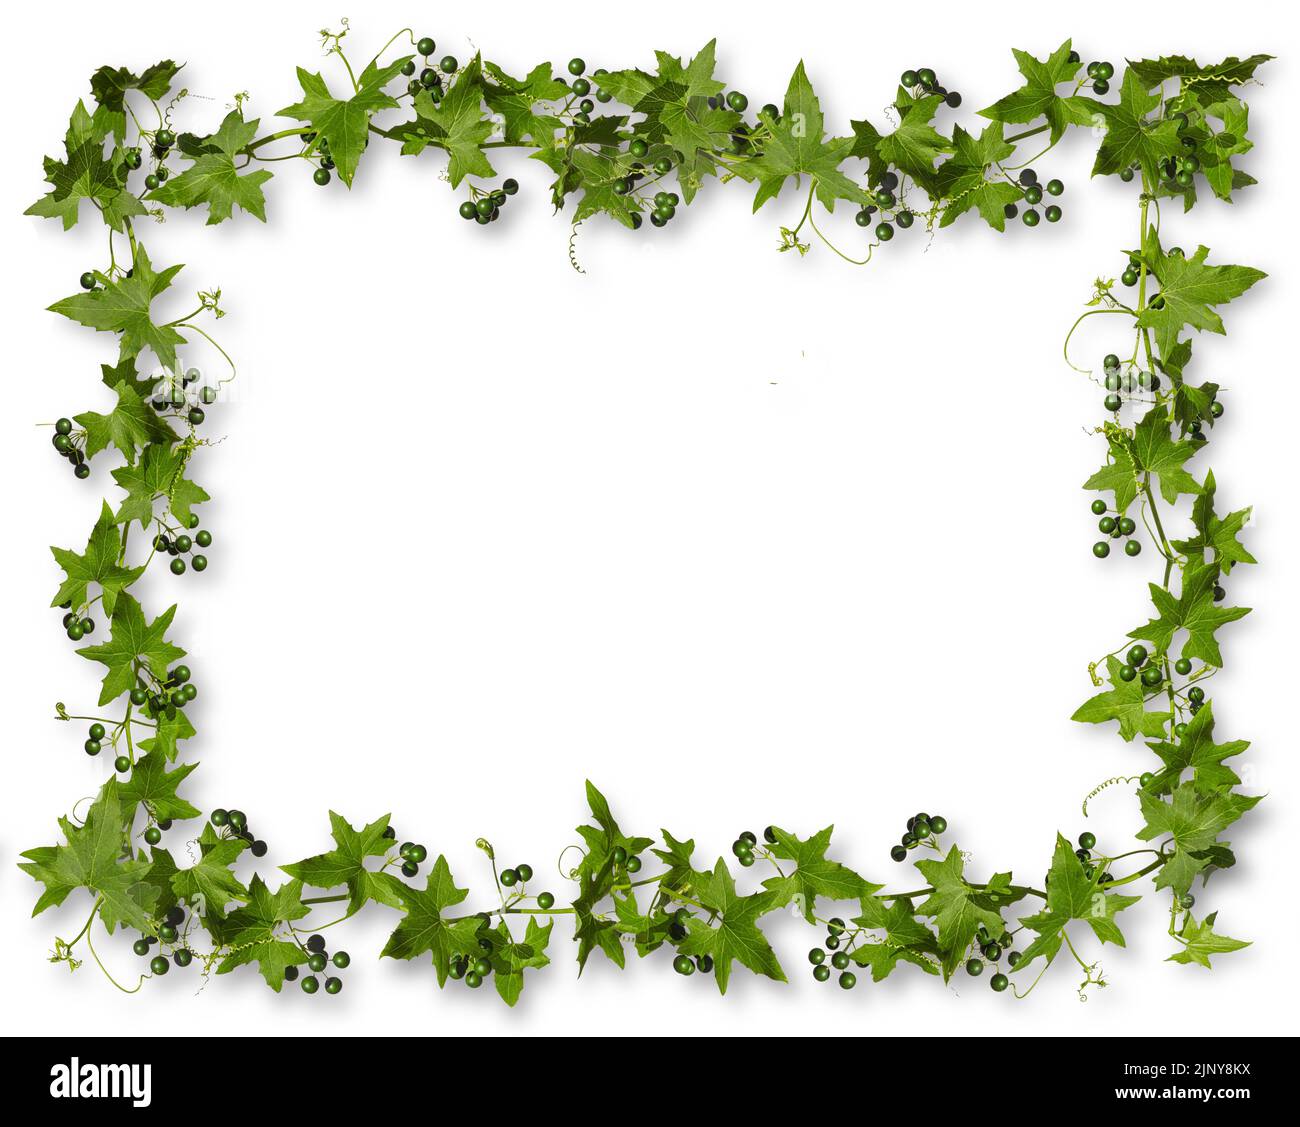 Ivy with green berries isolated on white background with shadows, rectangle frame. Stock Photo